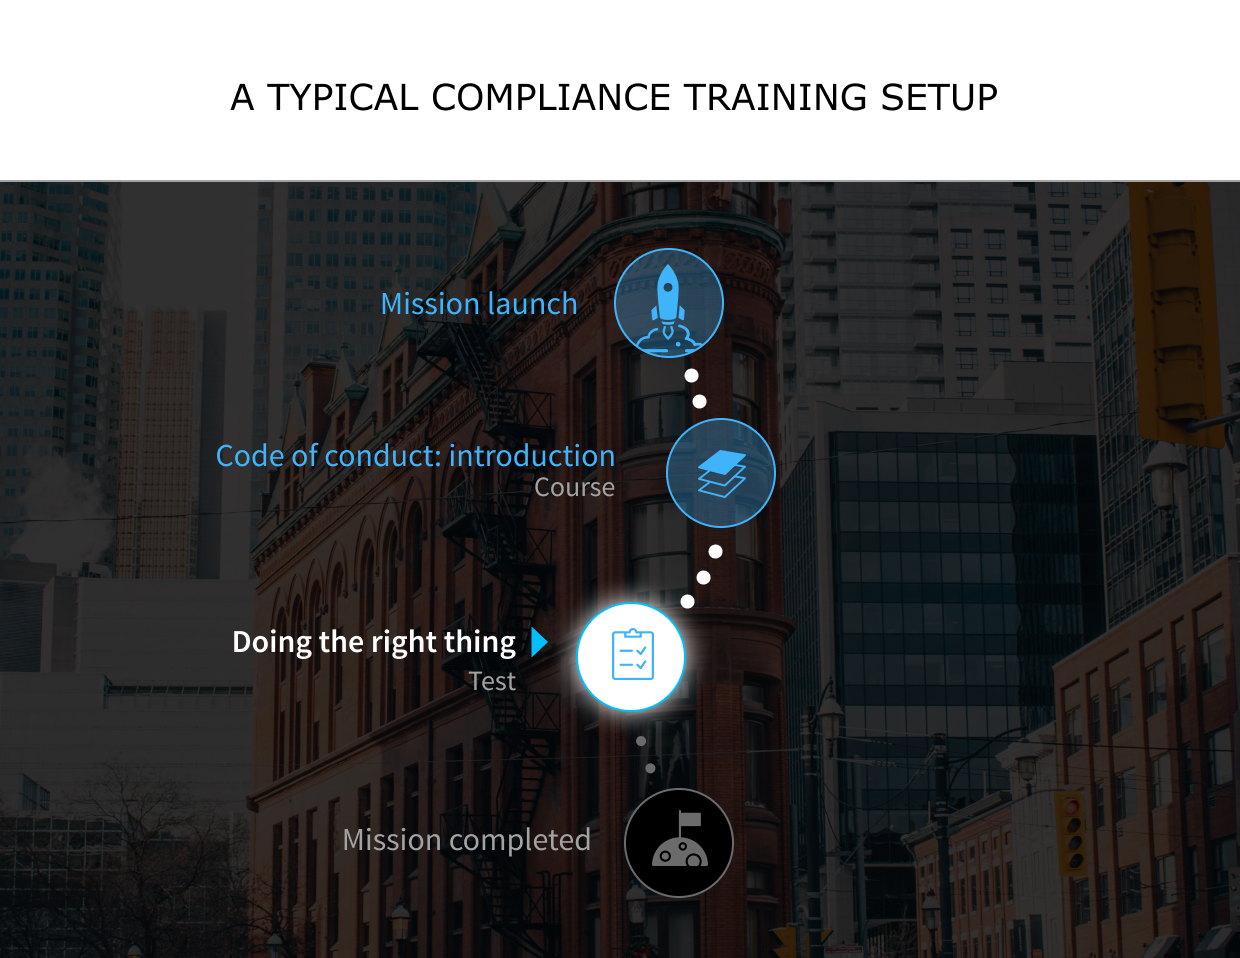 A typical compliance training setup with a course and a test